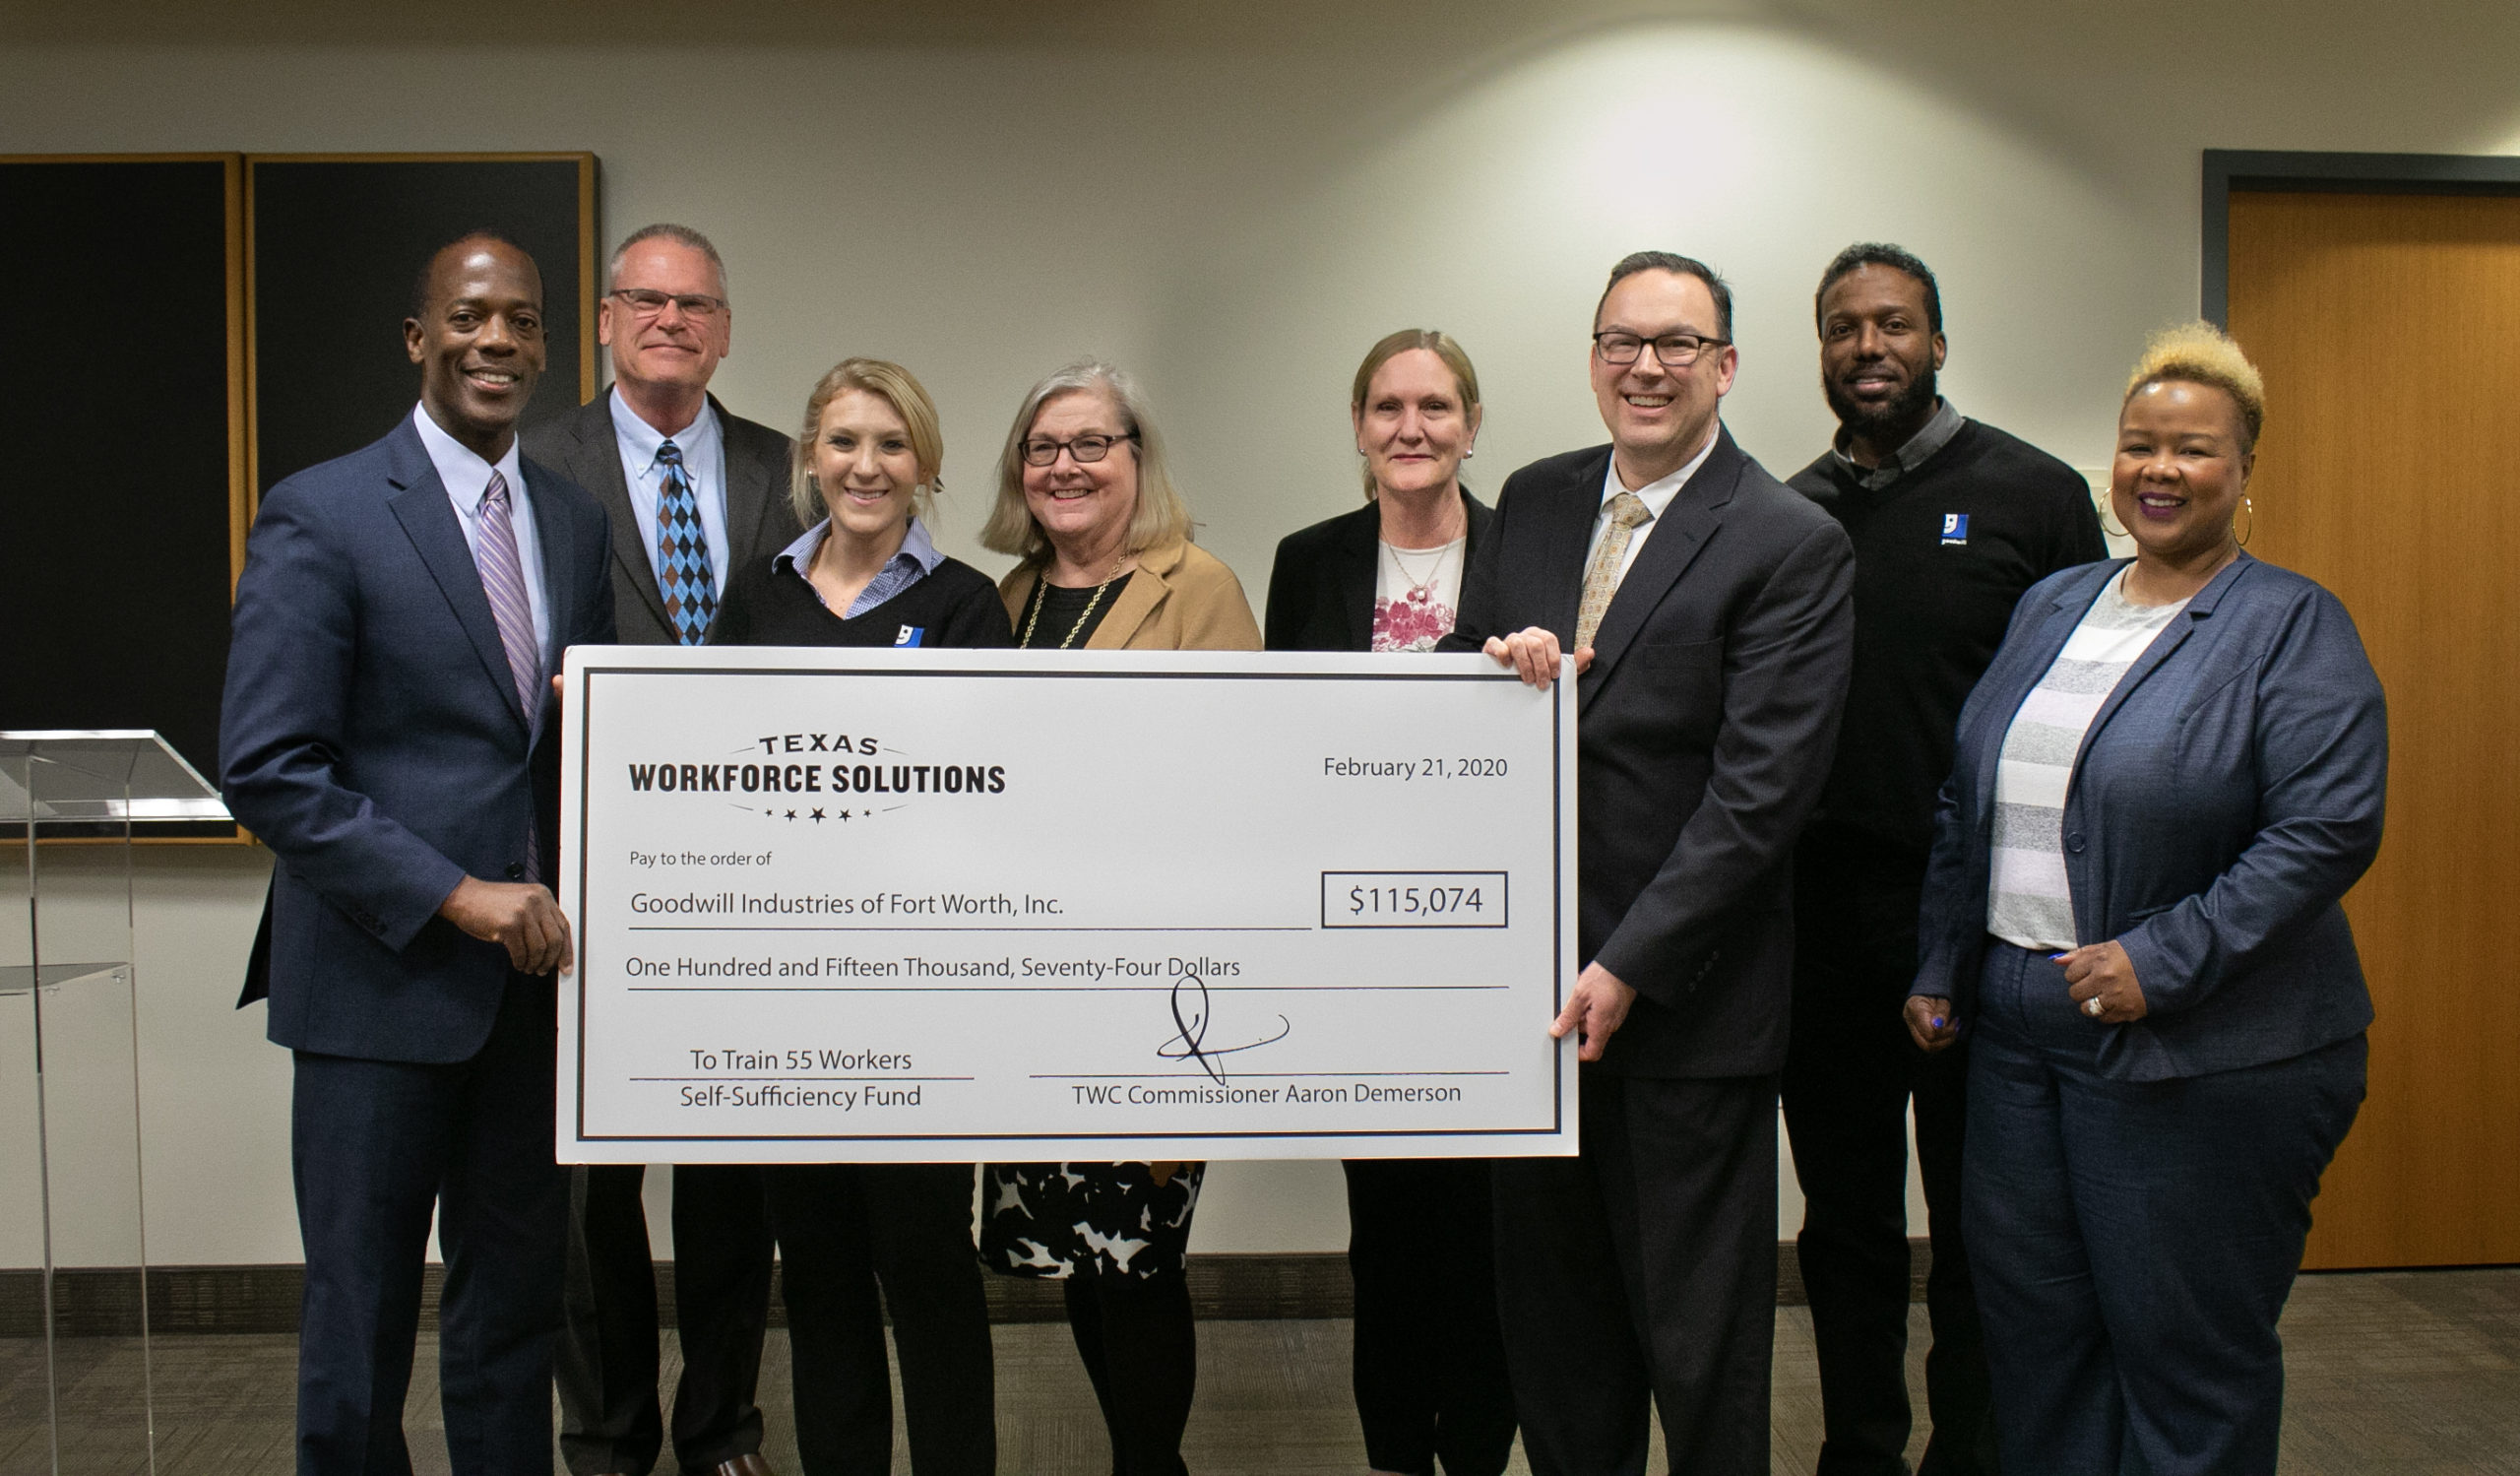 Goodwill North Central Texas accepting Grant check from Texas Workforce Commission